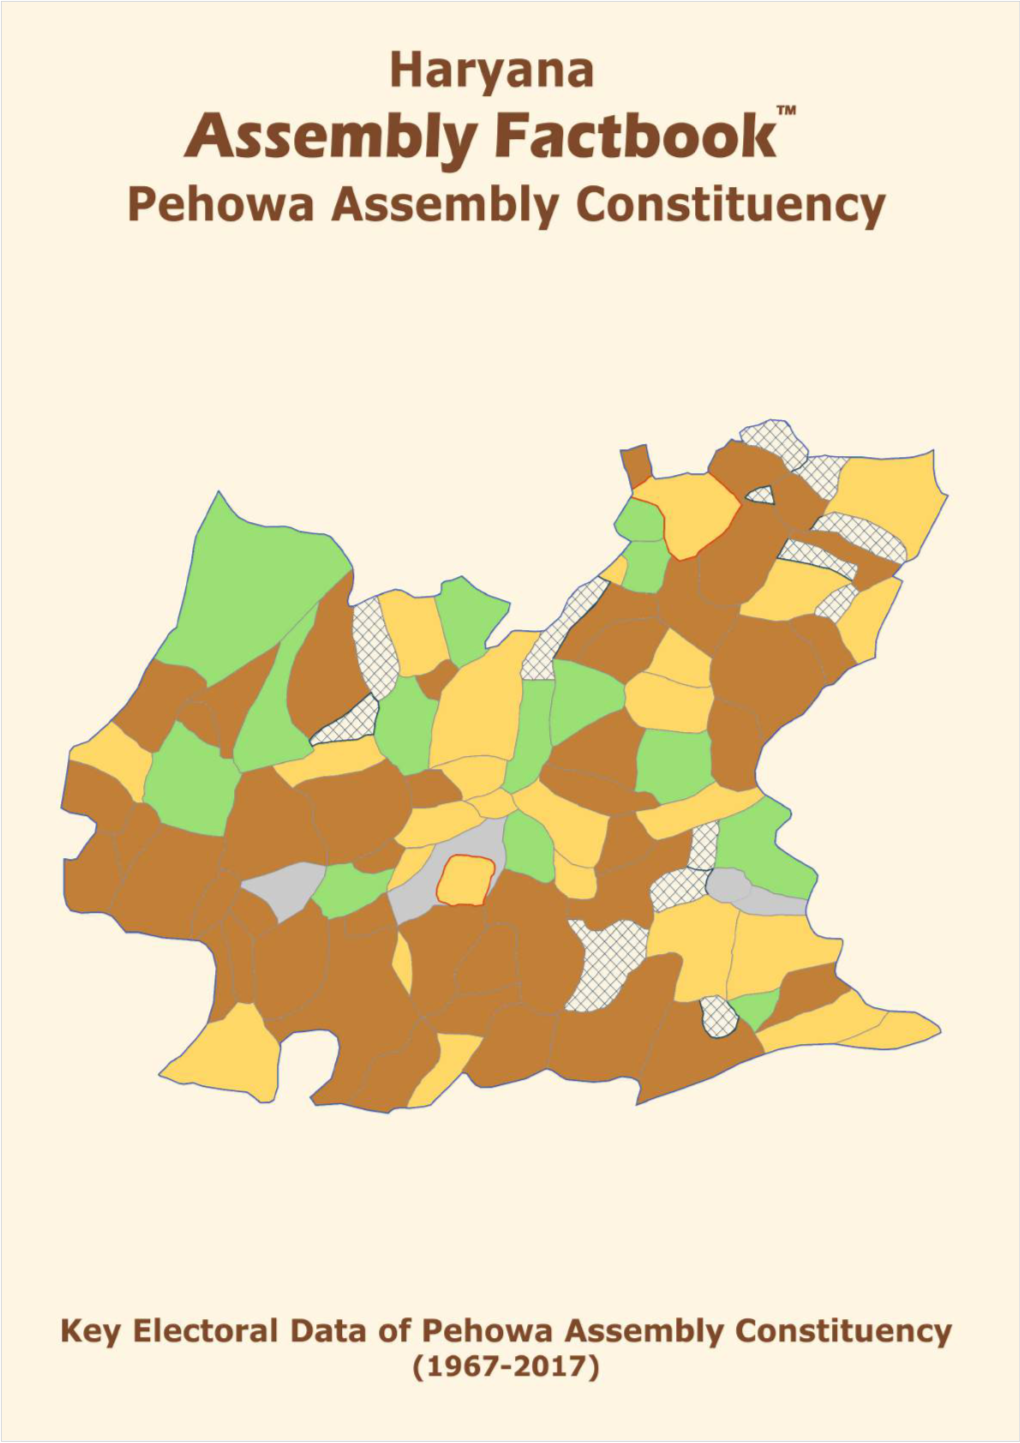 Pehowa Assembly Haryana Factbook | Key Electoral Data of Pehowa Assembly Constituency | Sample Book